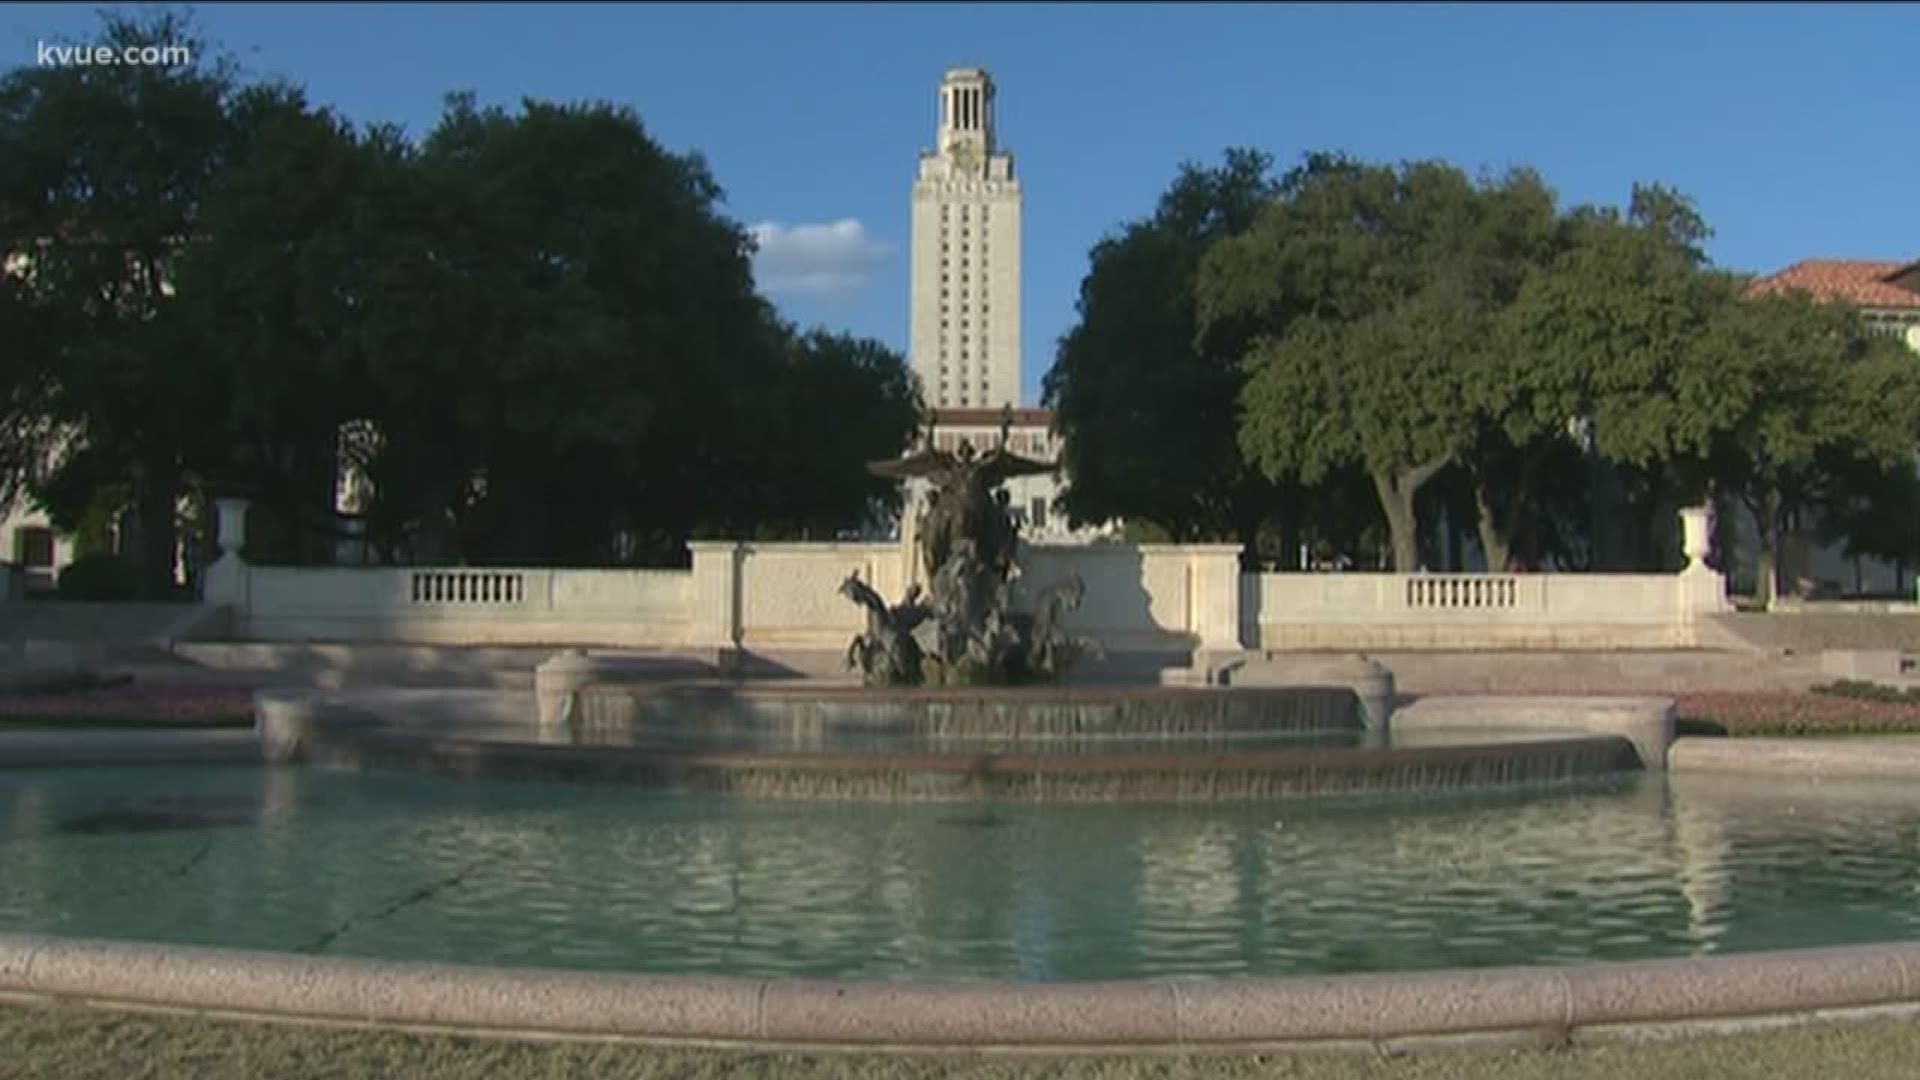 The University of Texas has wrapped up its investigation into a college admissions scandal.